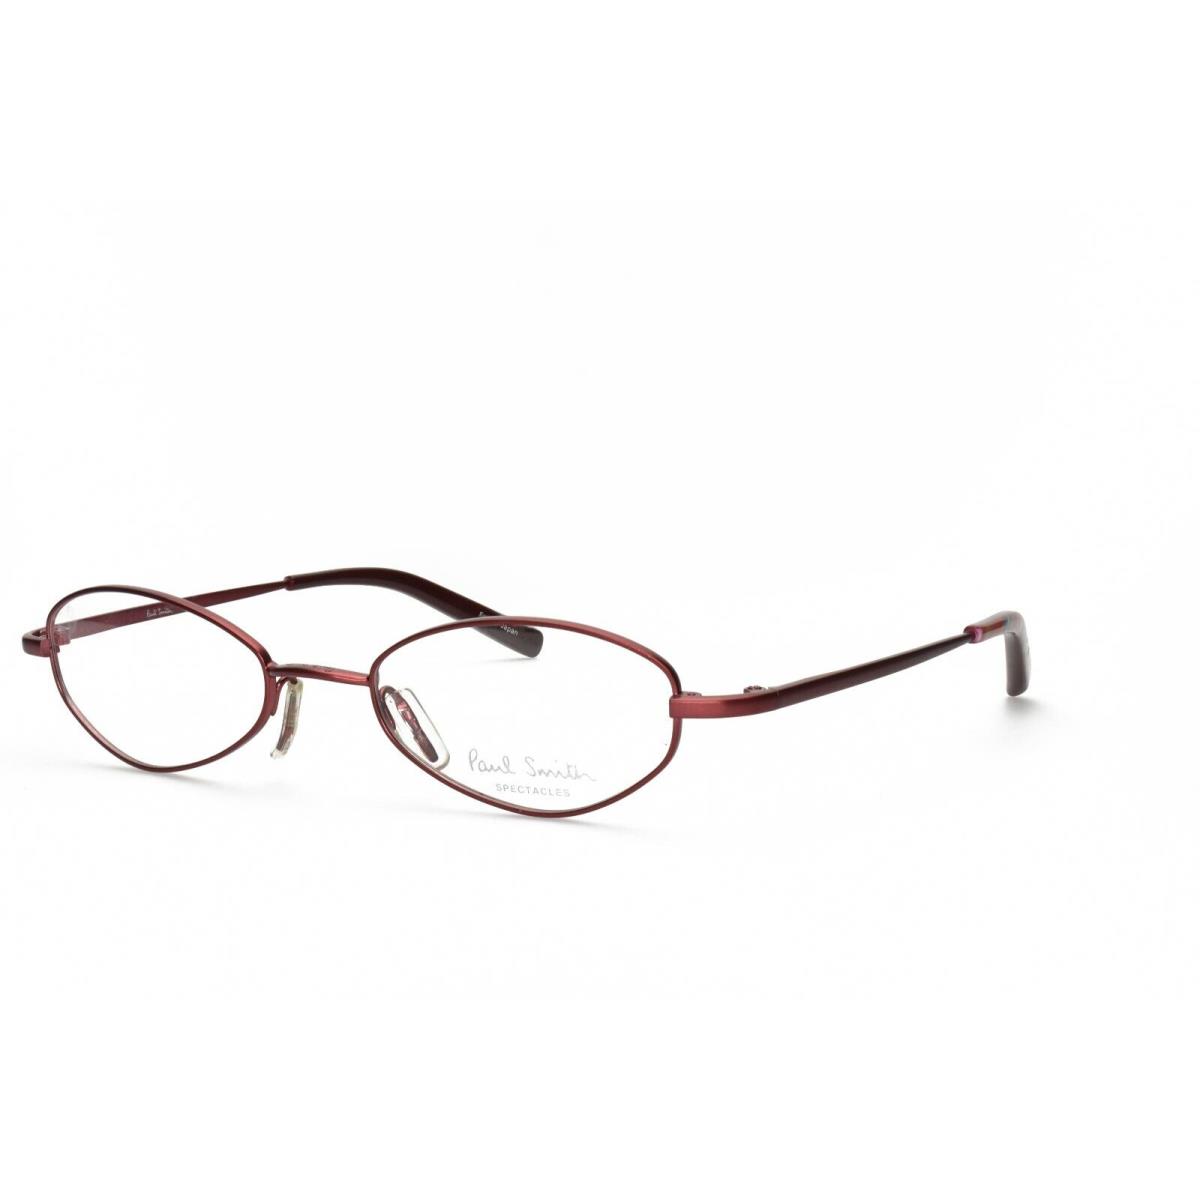 Paul Smith PS 198 Rou Eyeglasses Frames Only 48-19-132